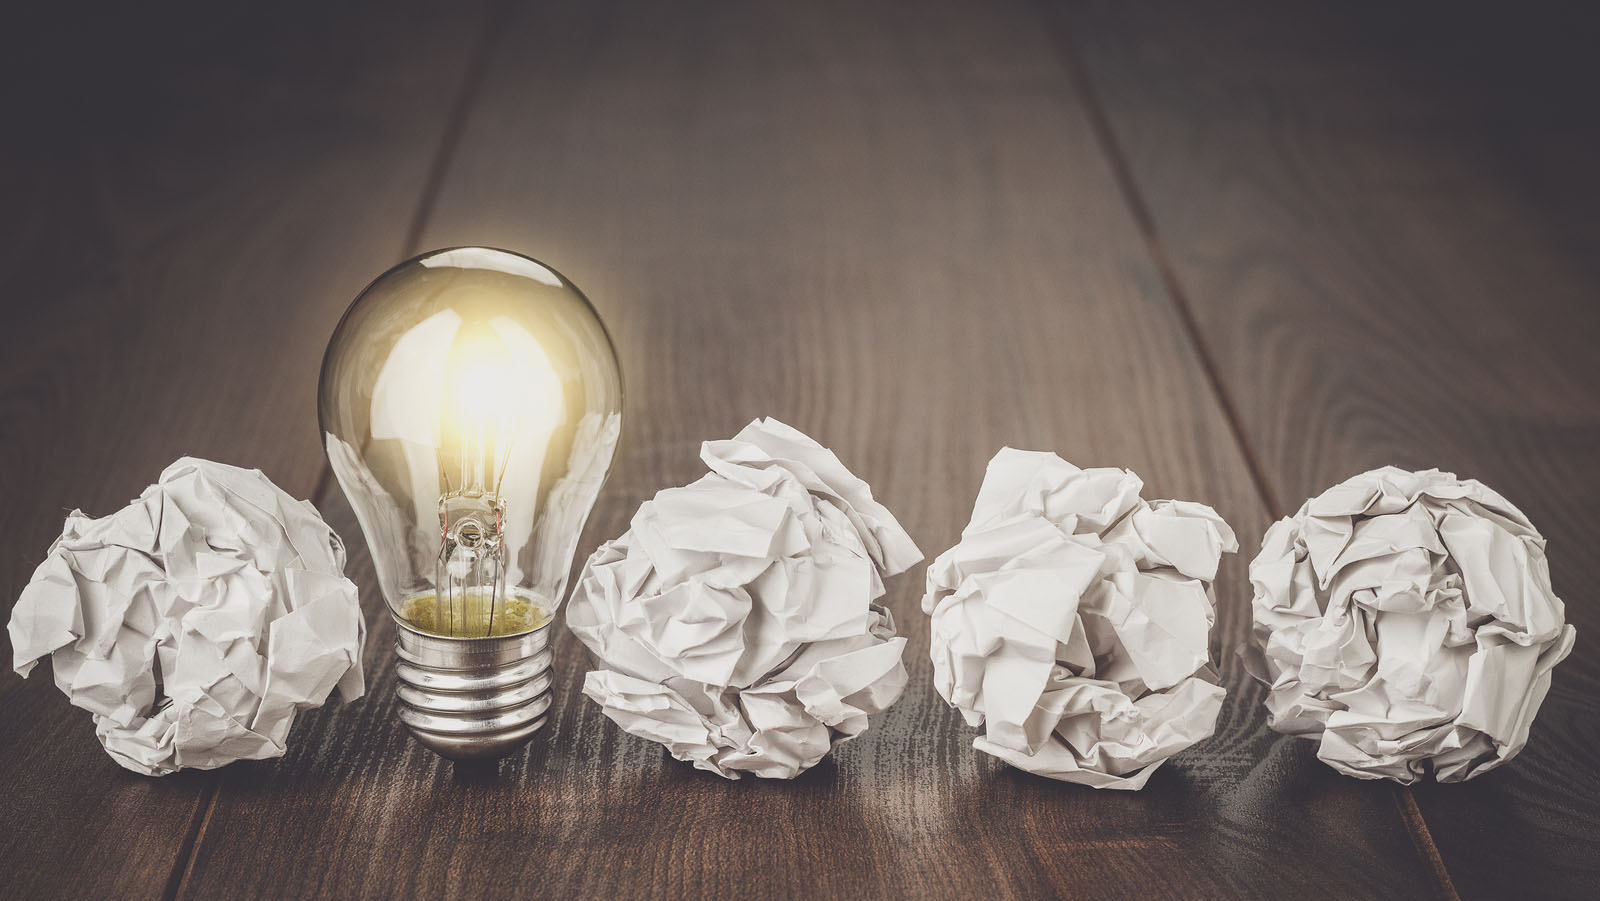 Great idea business concept. Business idea brainstorming concept with crumpled office paper. Great idea as light bulb standing on the office table. Business meeting concept. Business plan idea brainstorming concept.